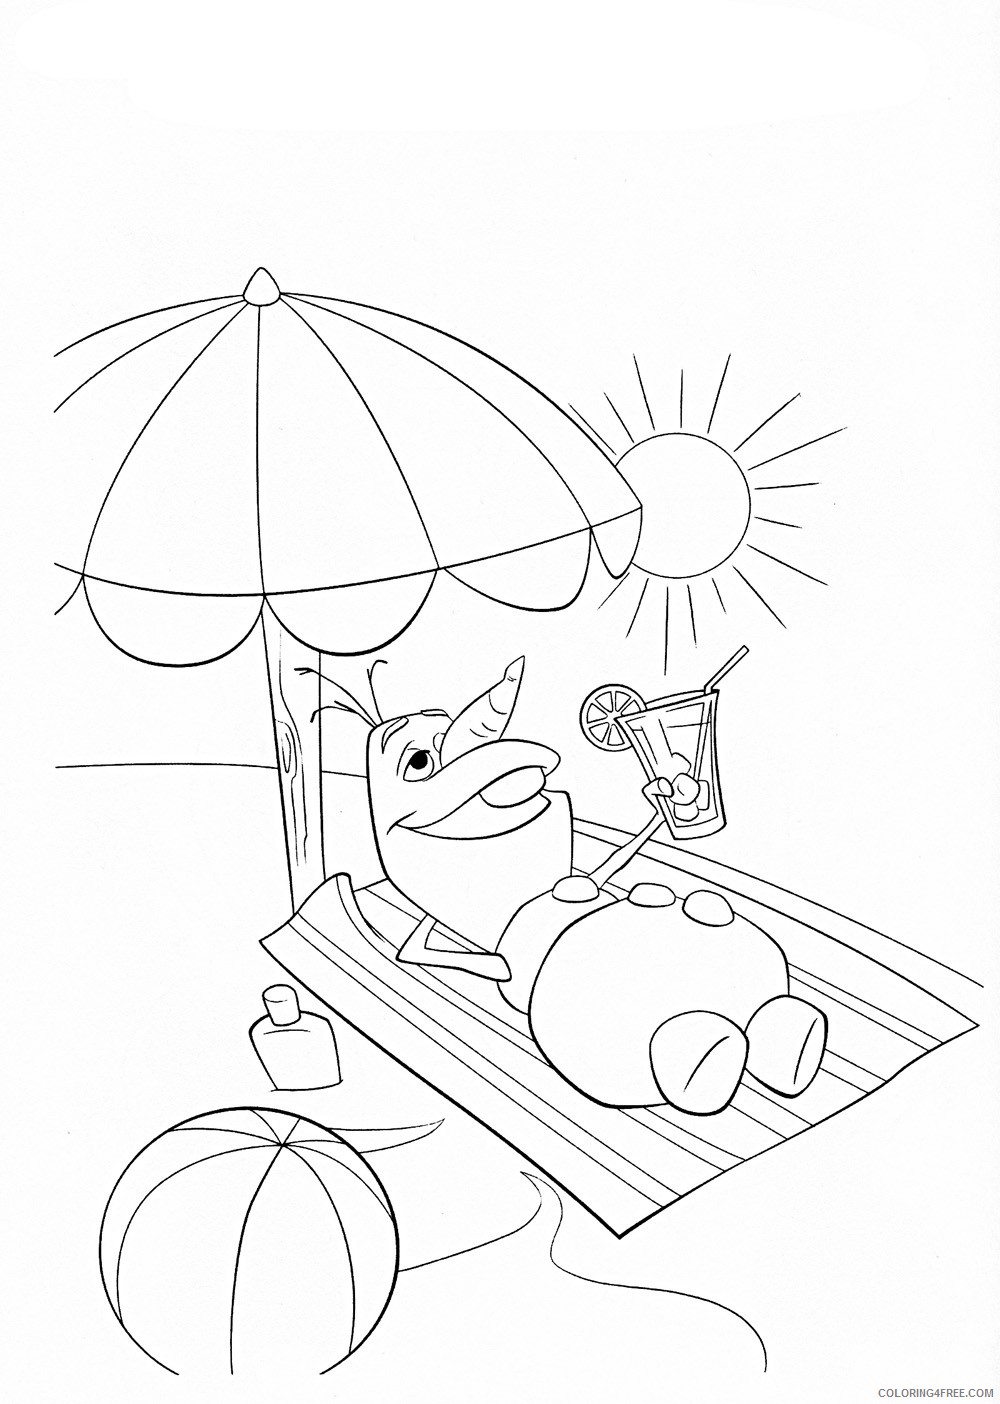 olaf coloring pages at the beach Coloring4free